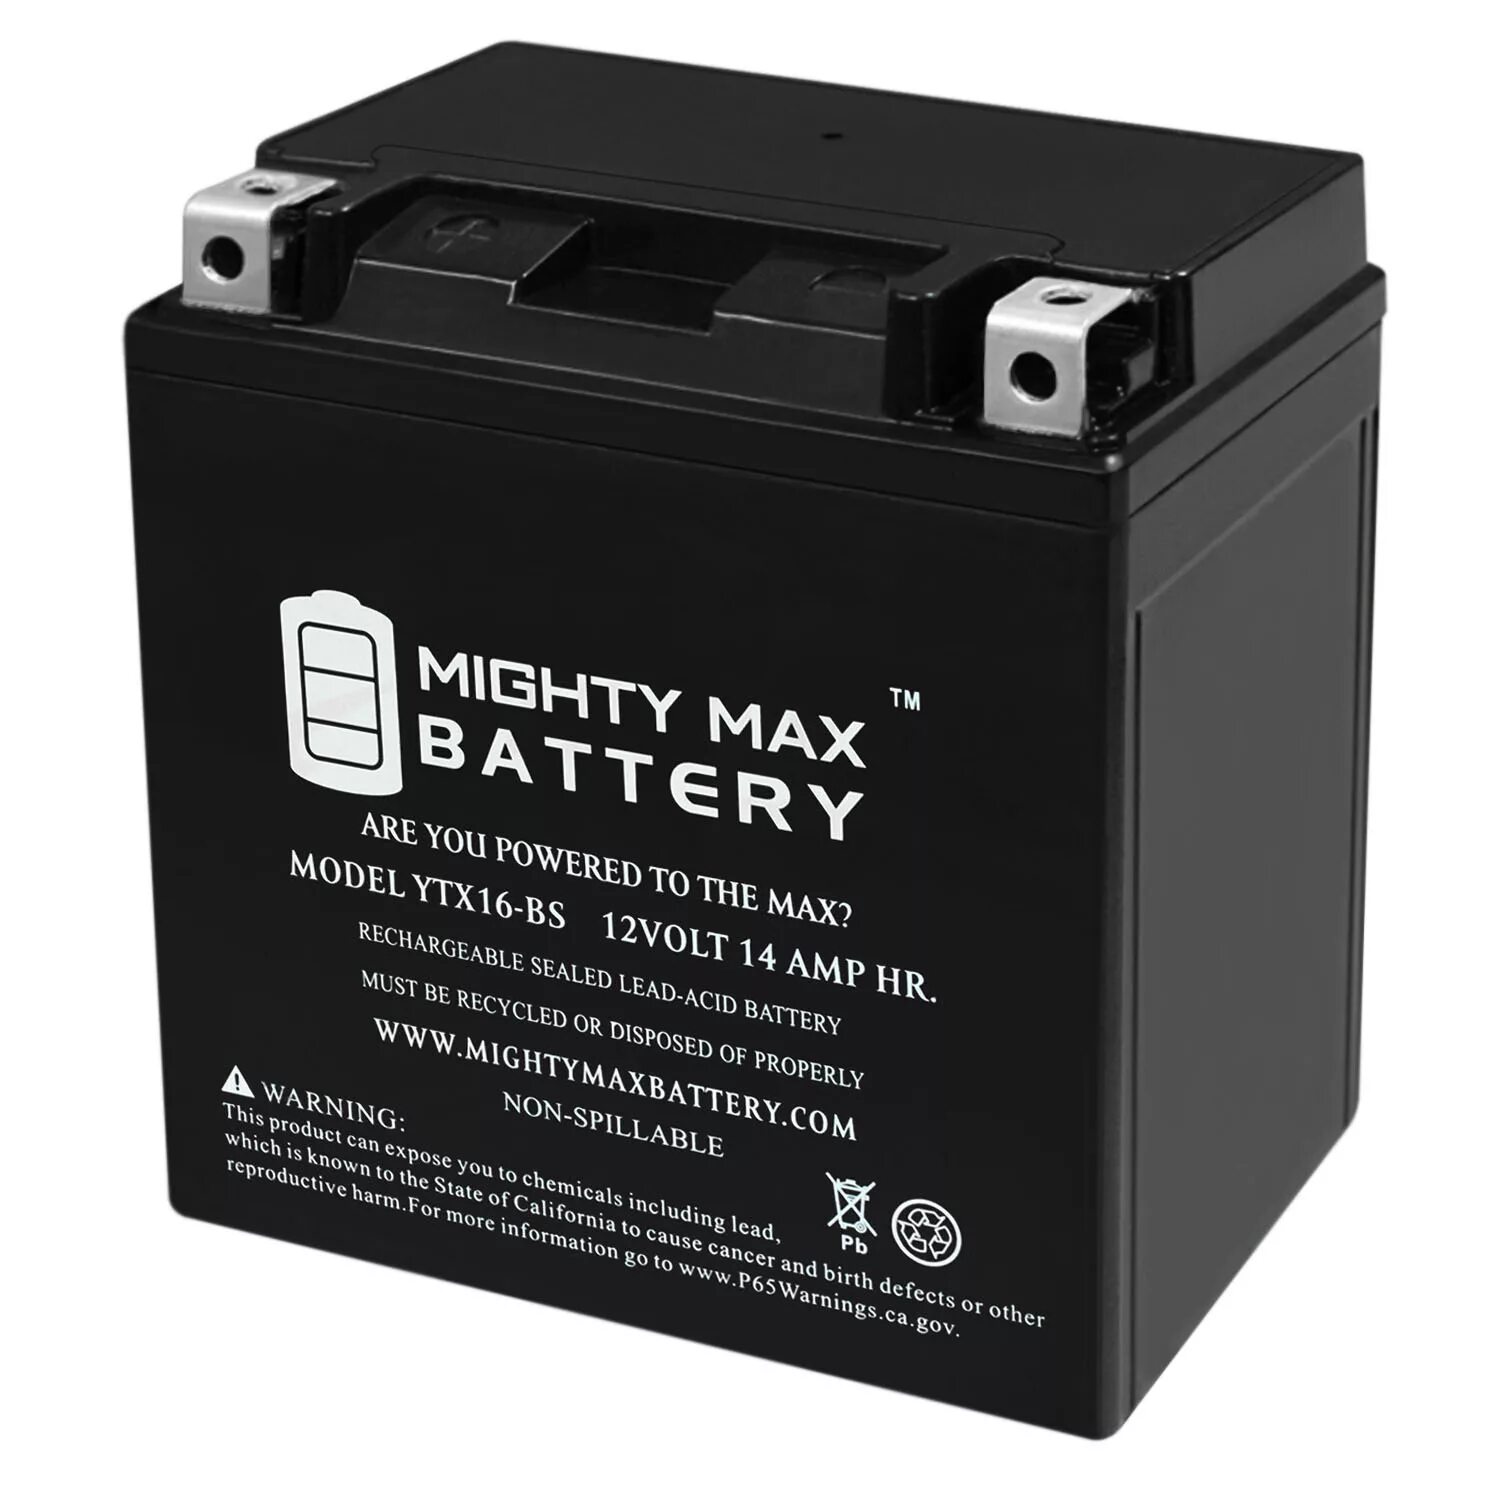 Yamaha Grizzly 125 аккумулятор. Power Sport Battery 16-4 12v14ah 230cca. Ytx14-BS. Аккумулятор Grizzly 63. Аккумулятор bs battery